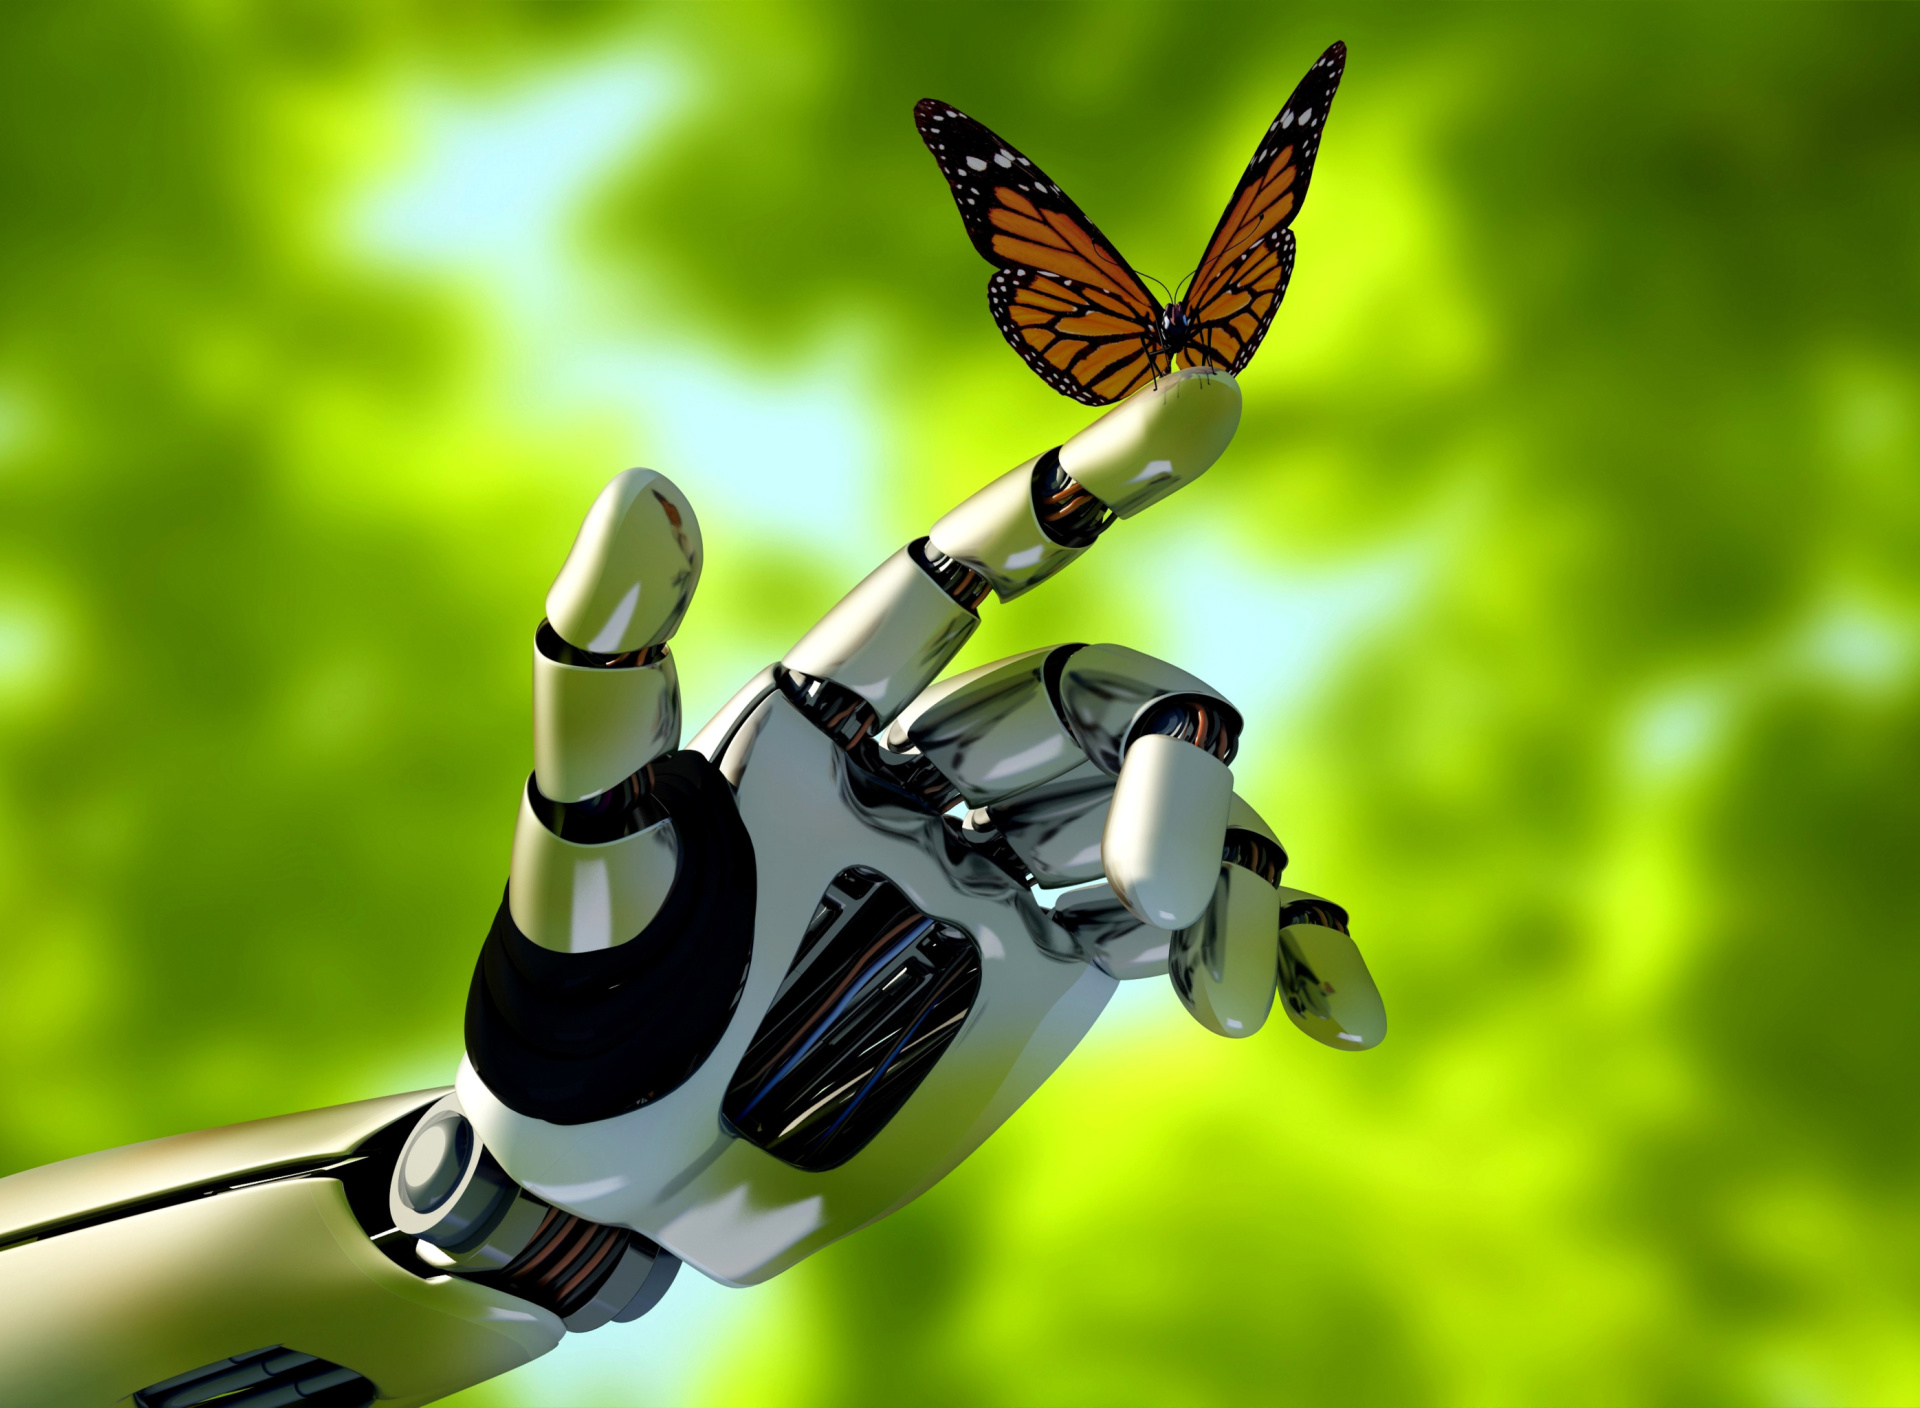 Robot hand and butterfly wallpaper 1920x1408